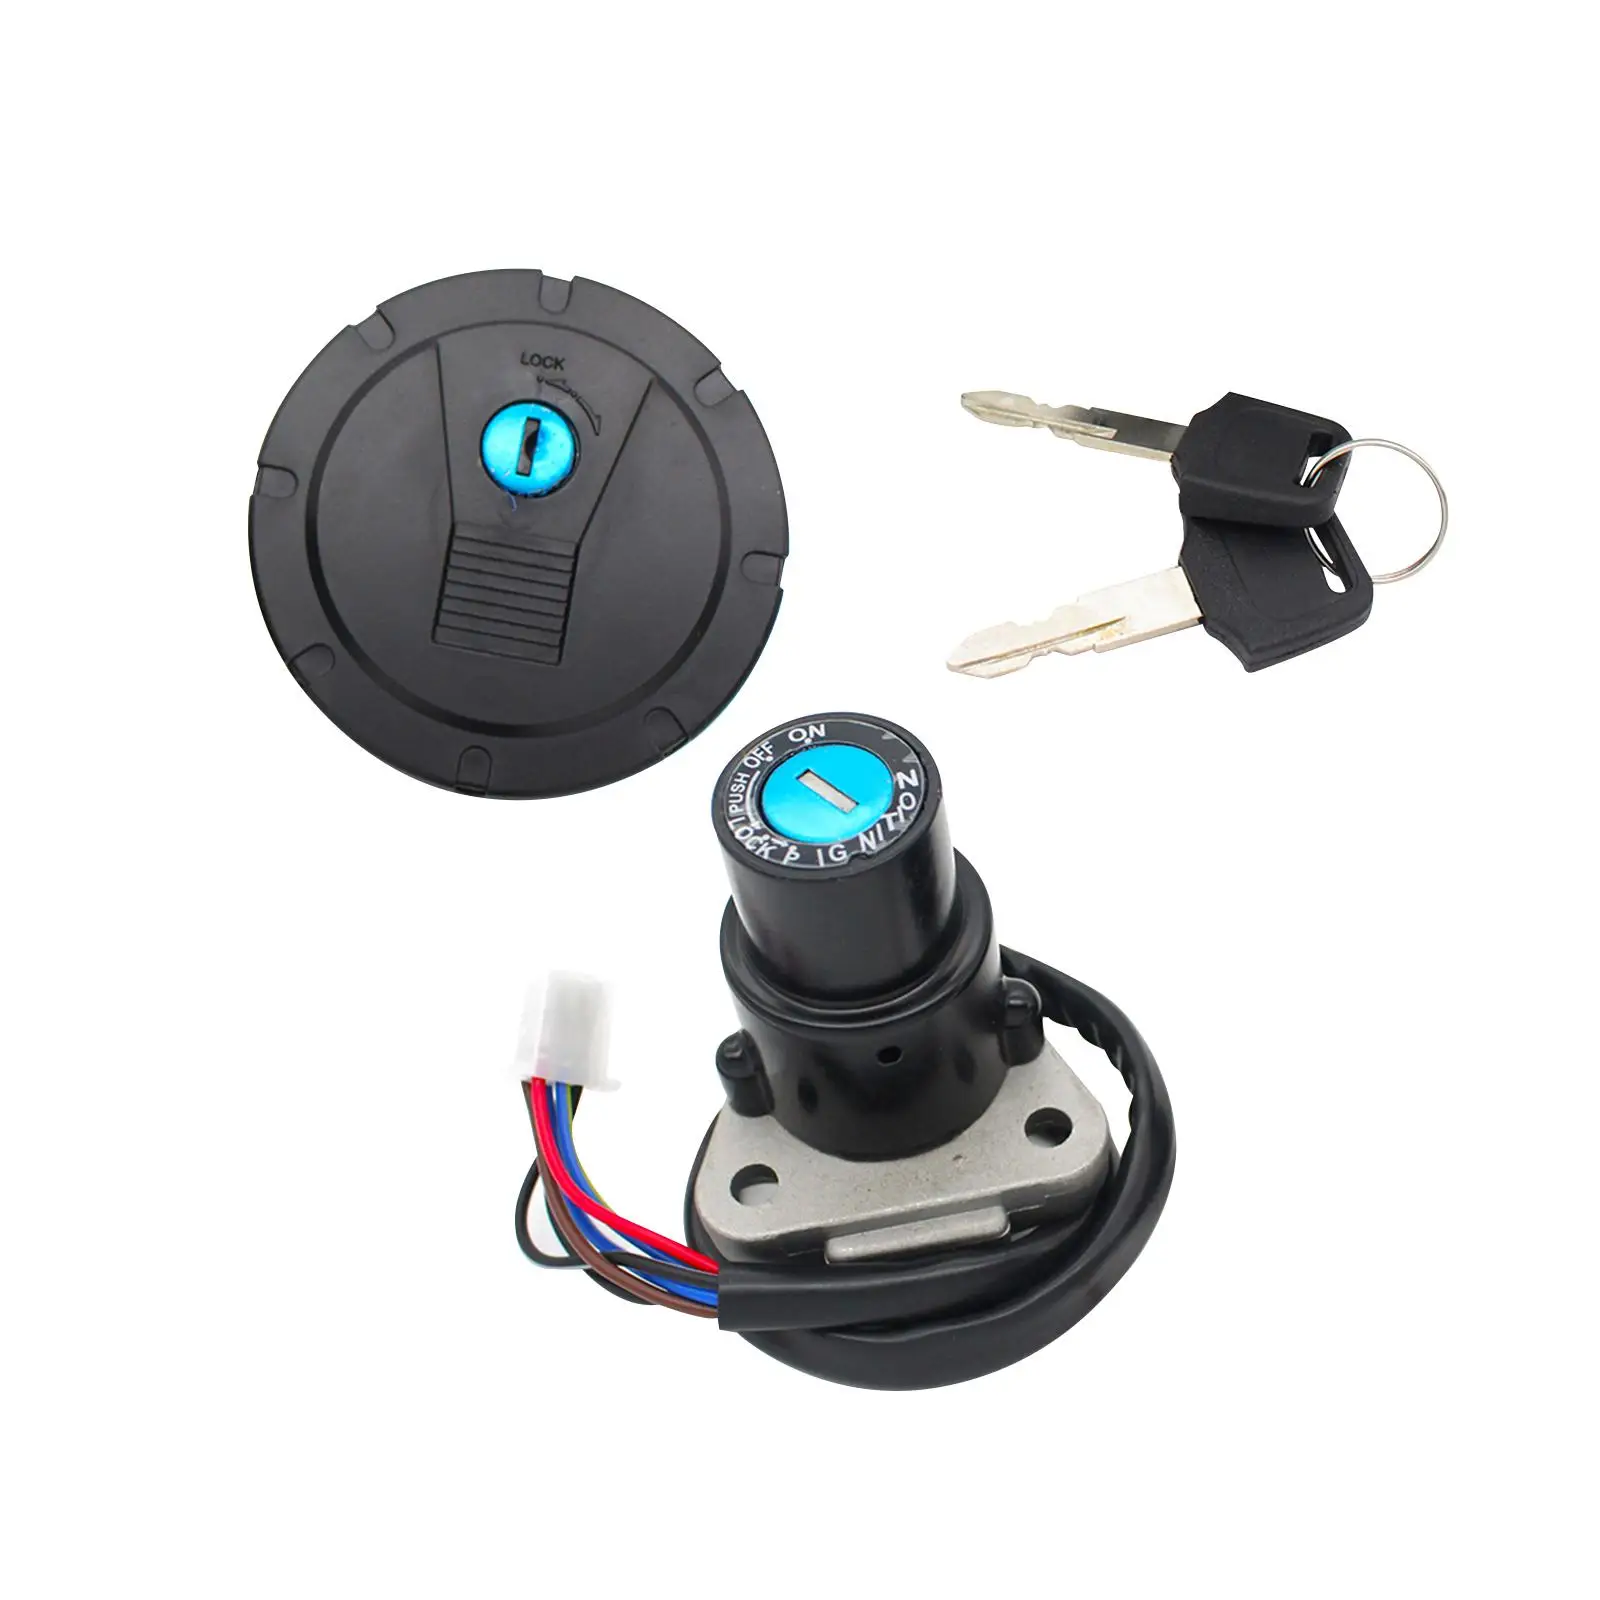 Ignition Key Switch/ Electric Door Lock /High Performance /Premium /Accessories